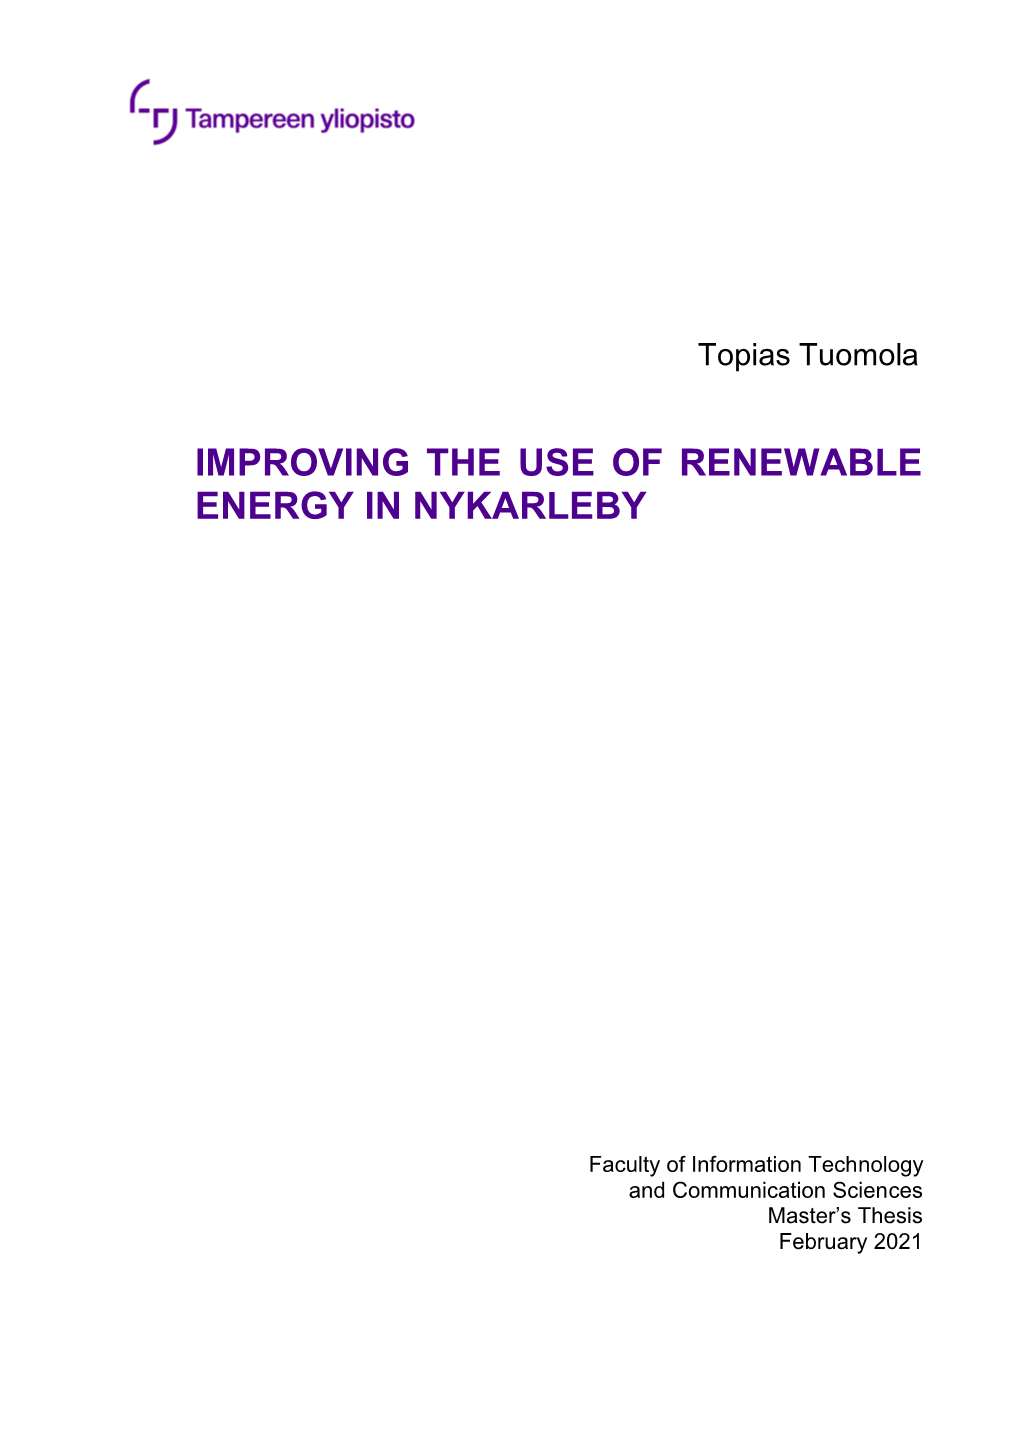 Improving the Use of Renewable Energy in Nykarleby